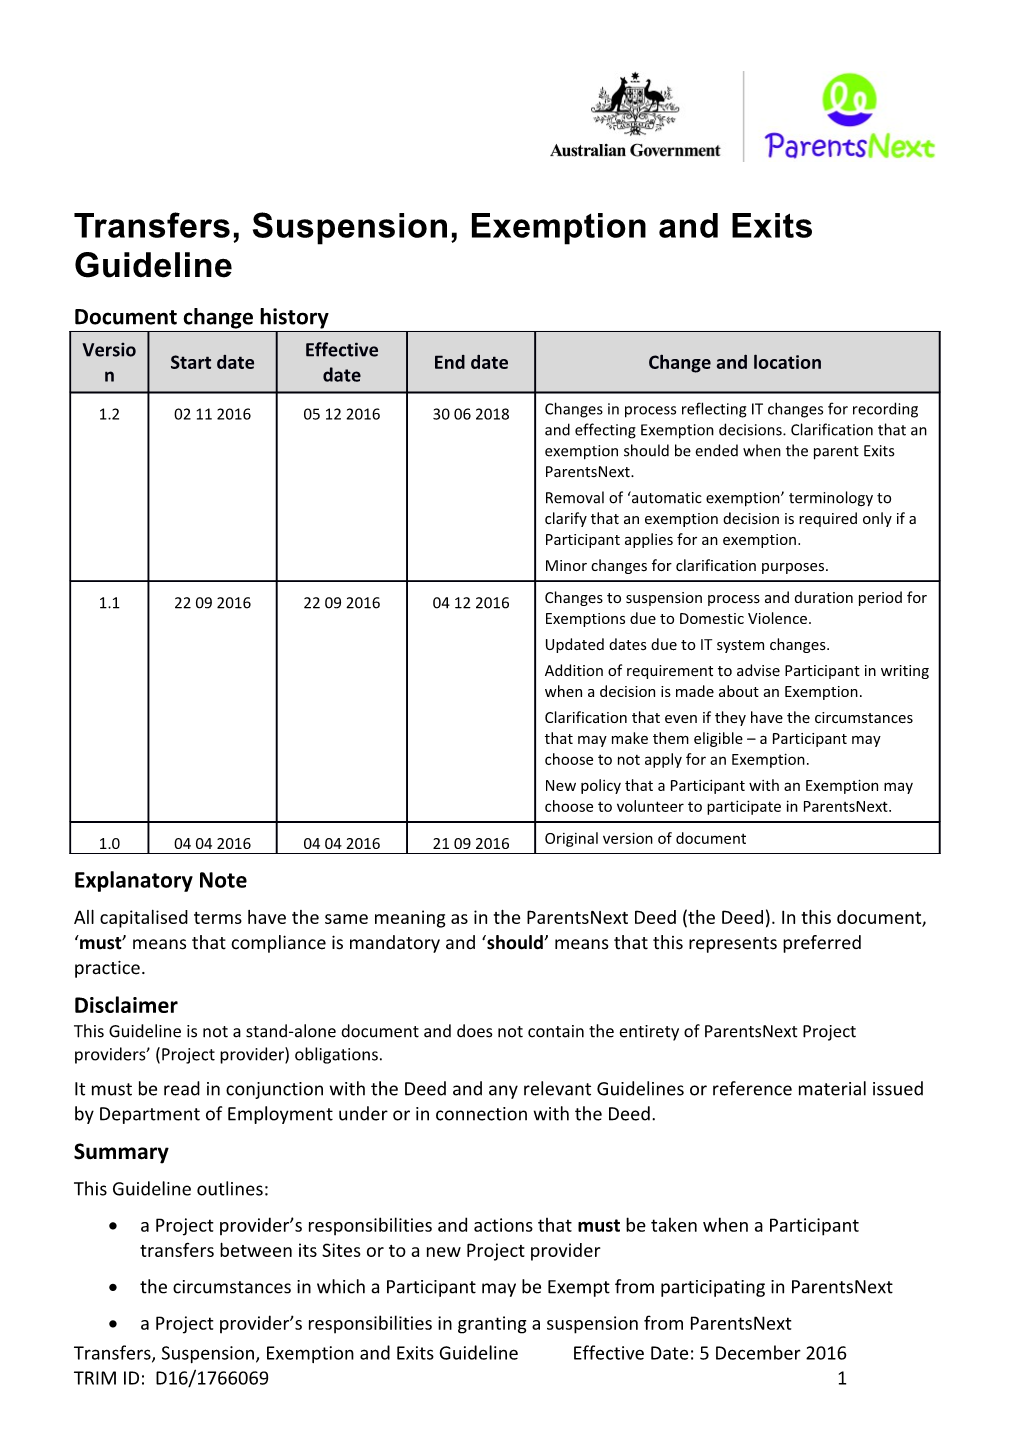 Transfers Suspensions Exemptions and Exits Guideline